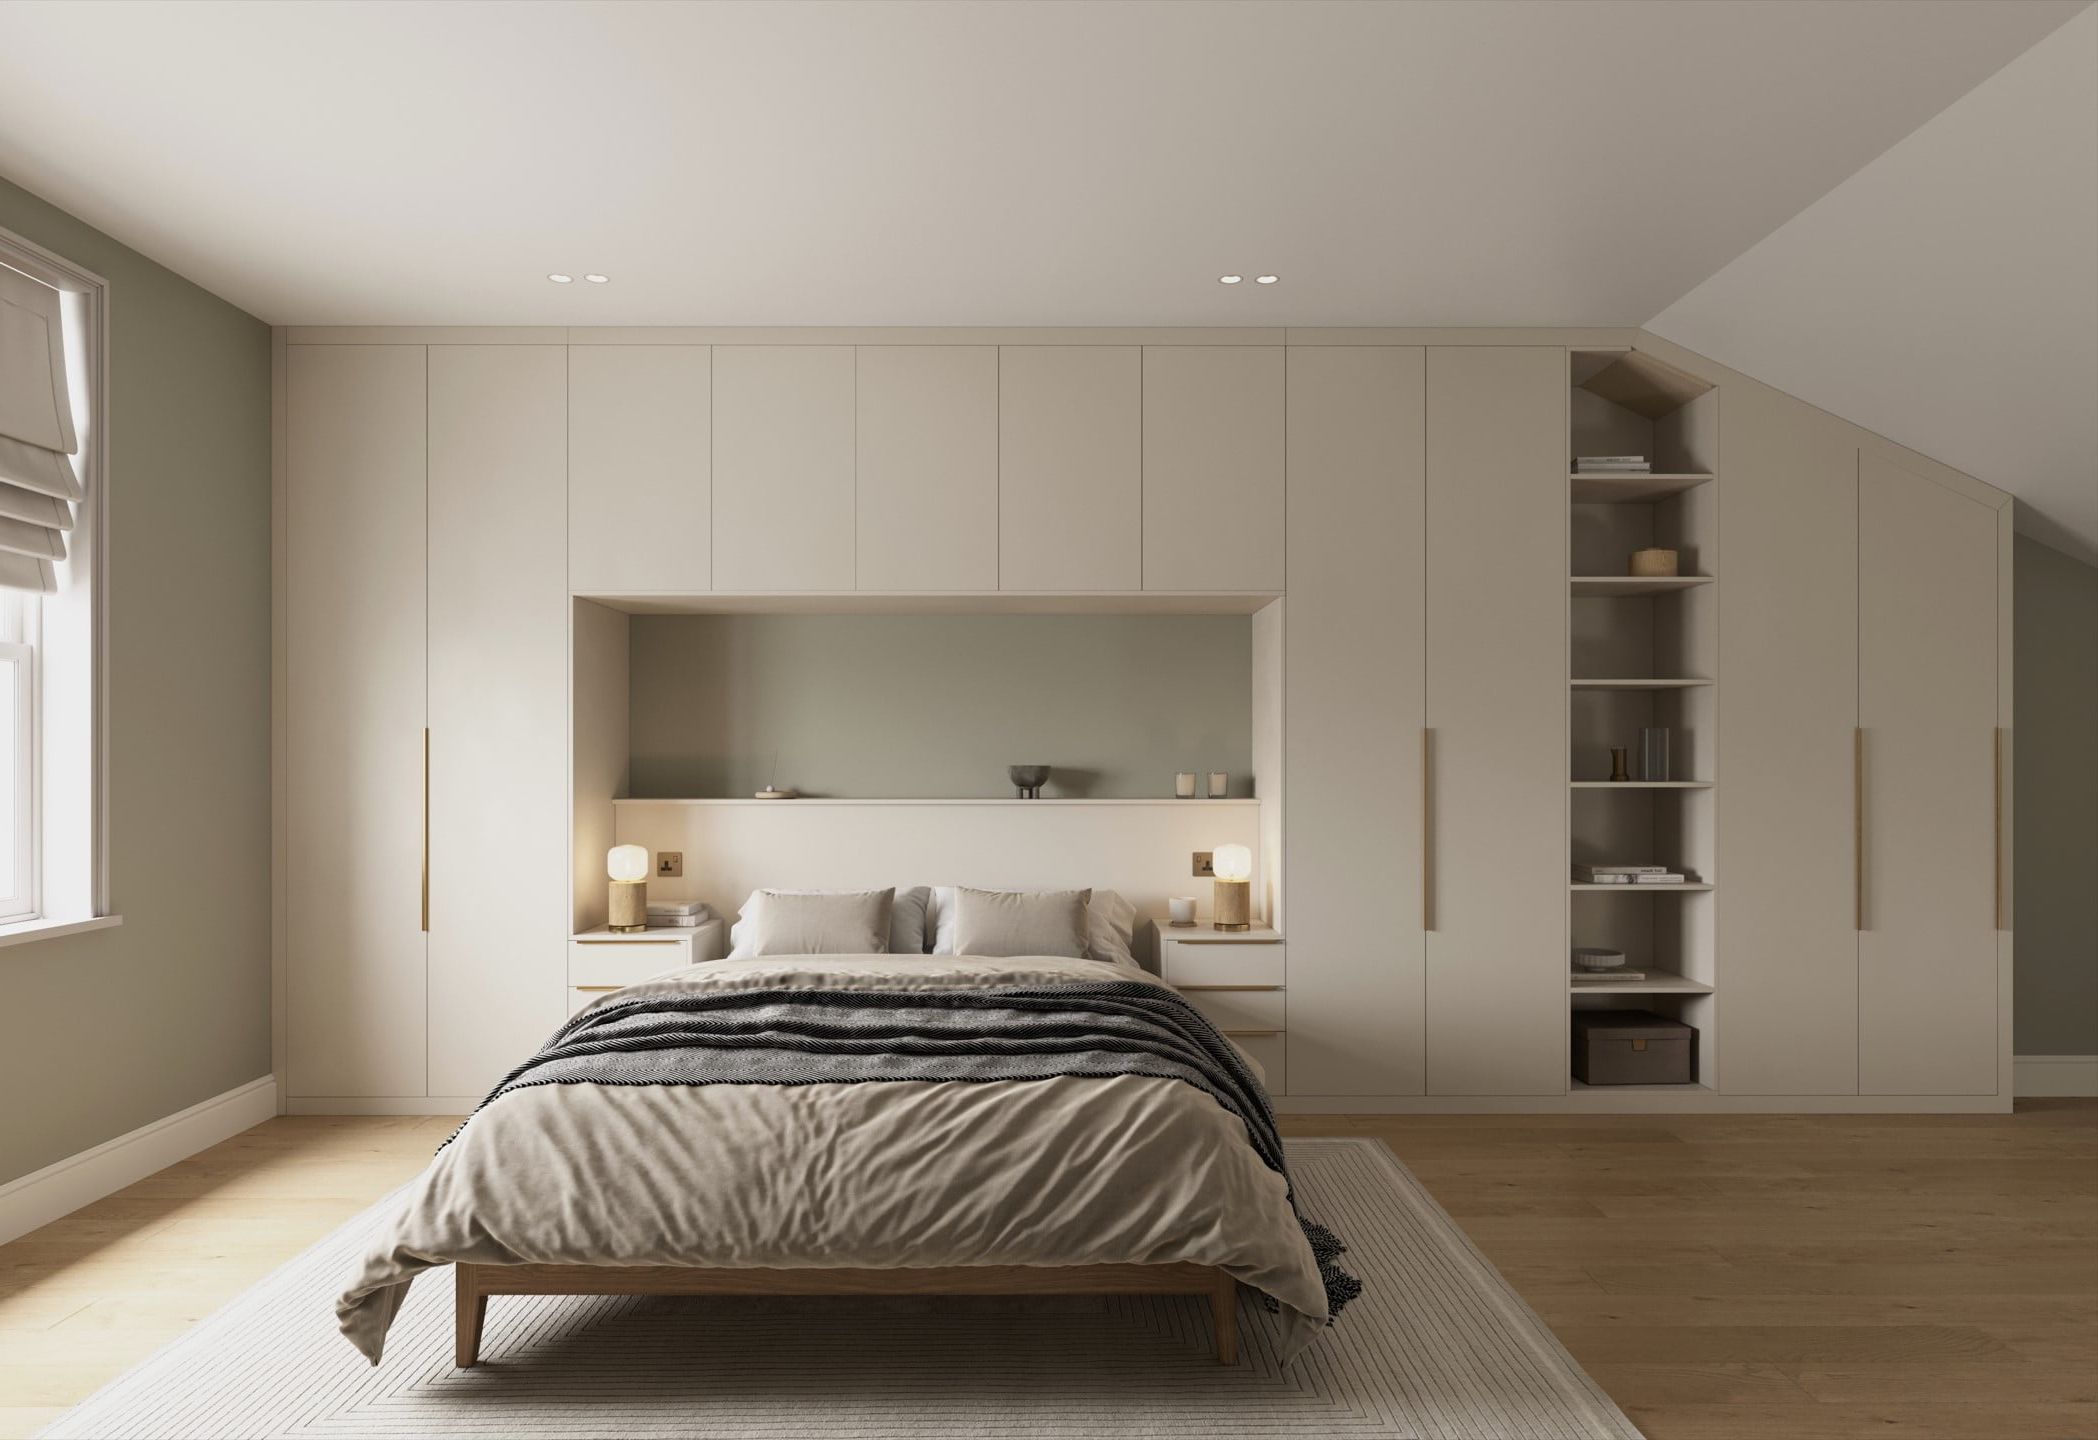 Overbed Fitted Wardrobes And Storage Units, Bespoke Overhead Storage Inside Bedroom Wardrobes Storages (View 3 of 20)